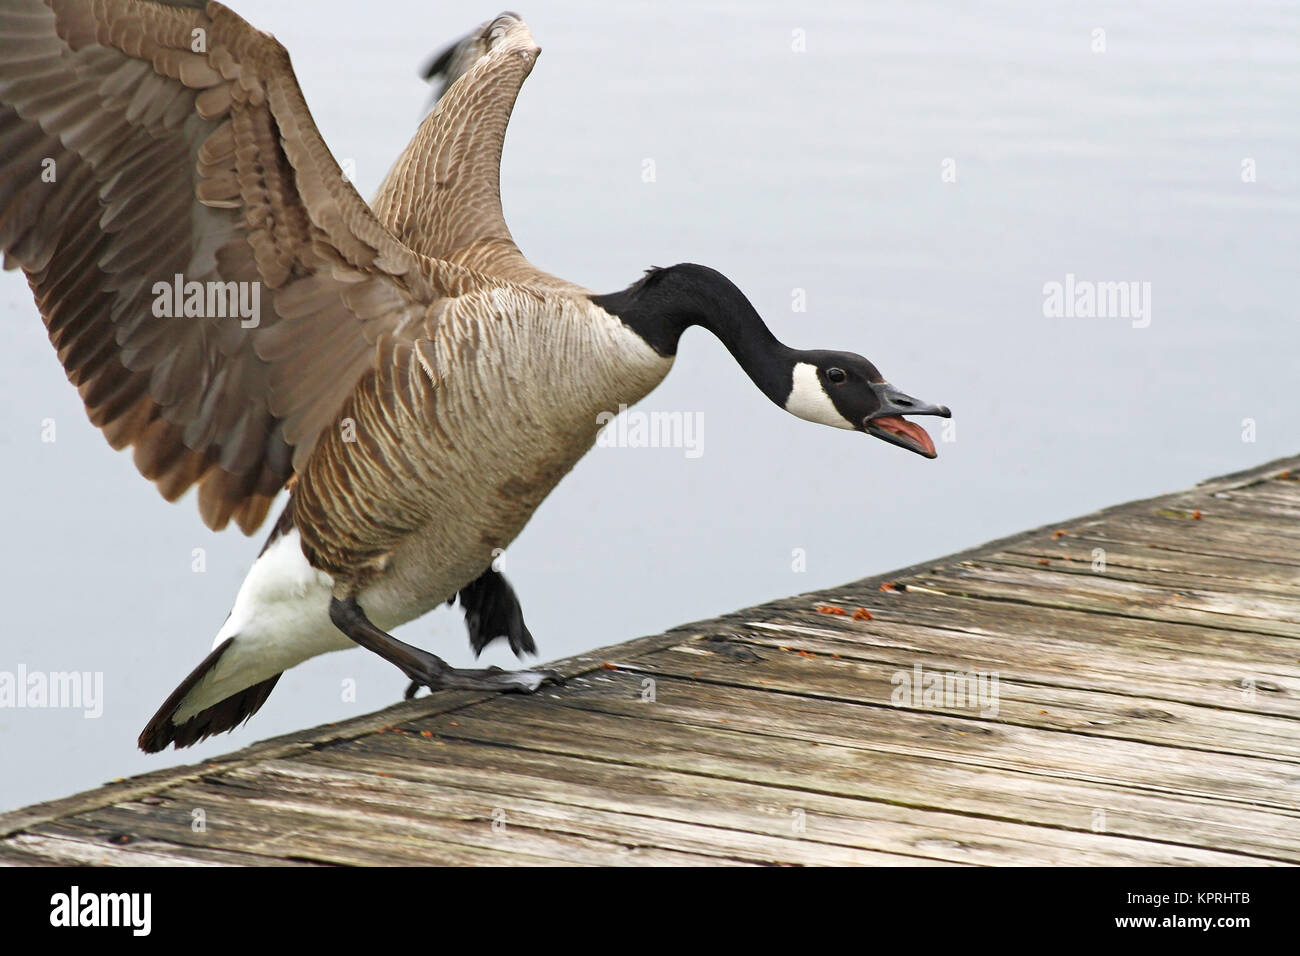 Aggressive Canada Goose landing on edge of a wooden Pier Stock Photo